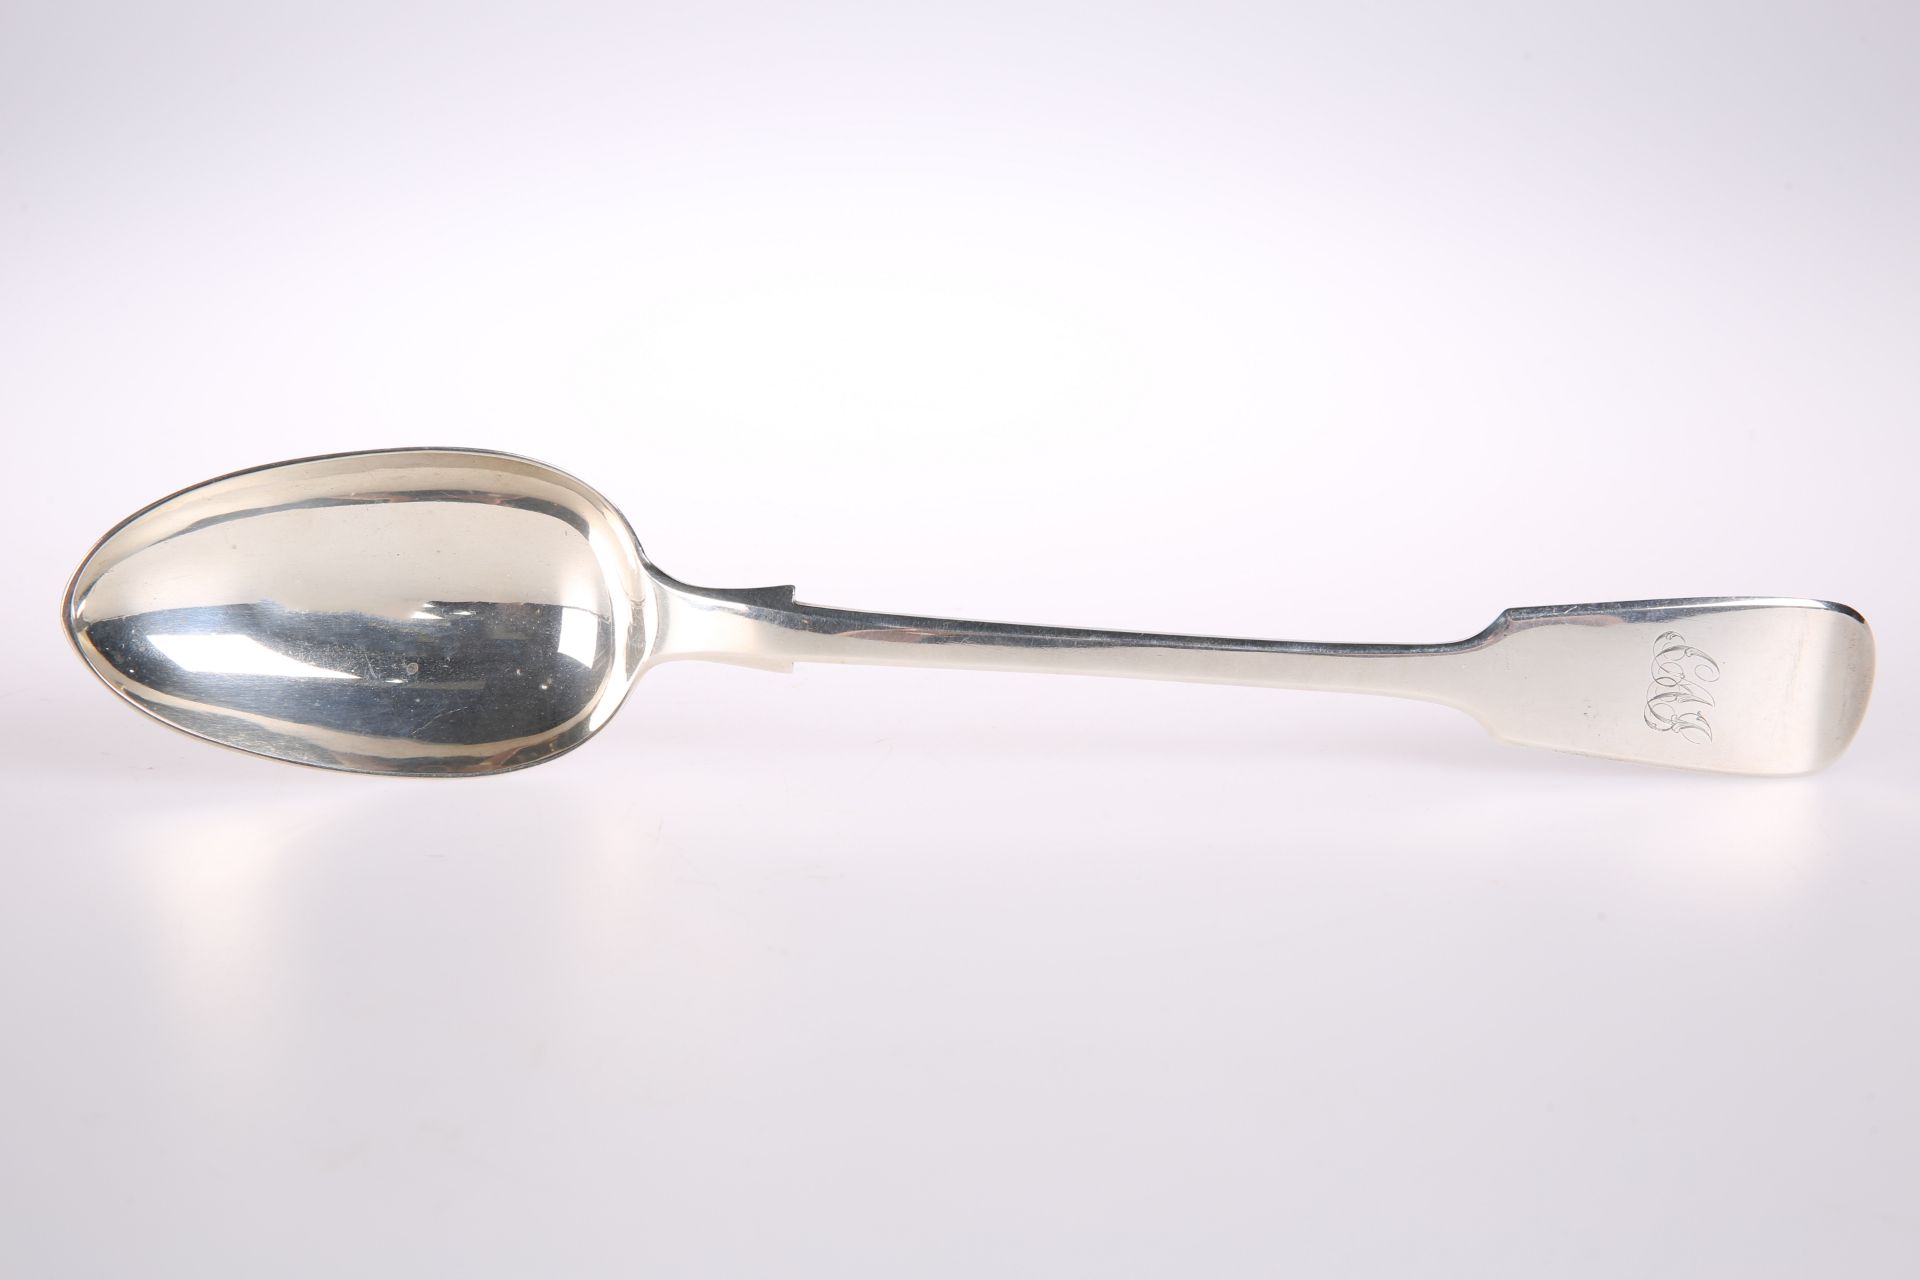 A VICTORIAN SILVER FIDDLE PATTERN BASTING SPOON